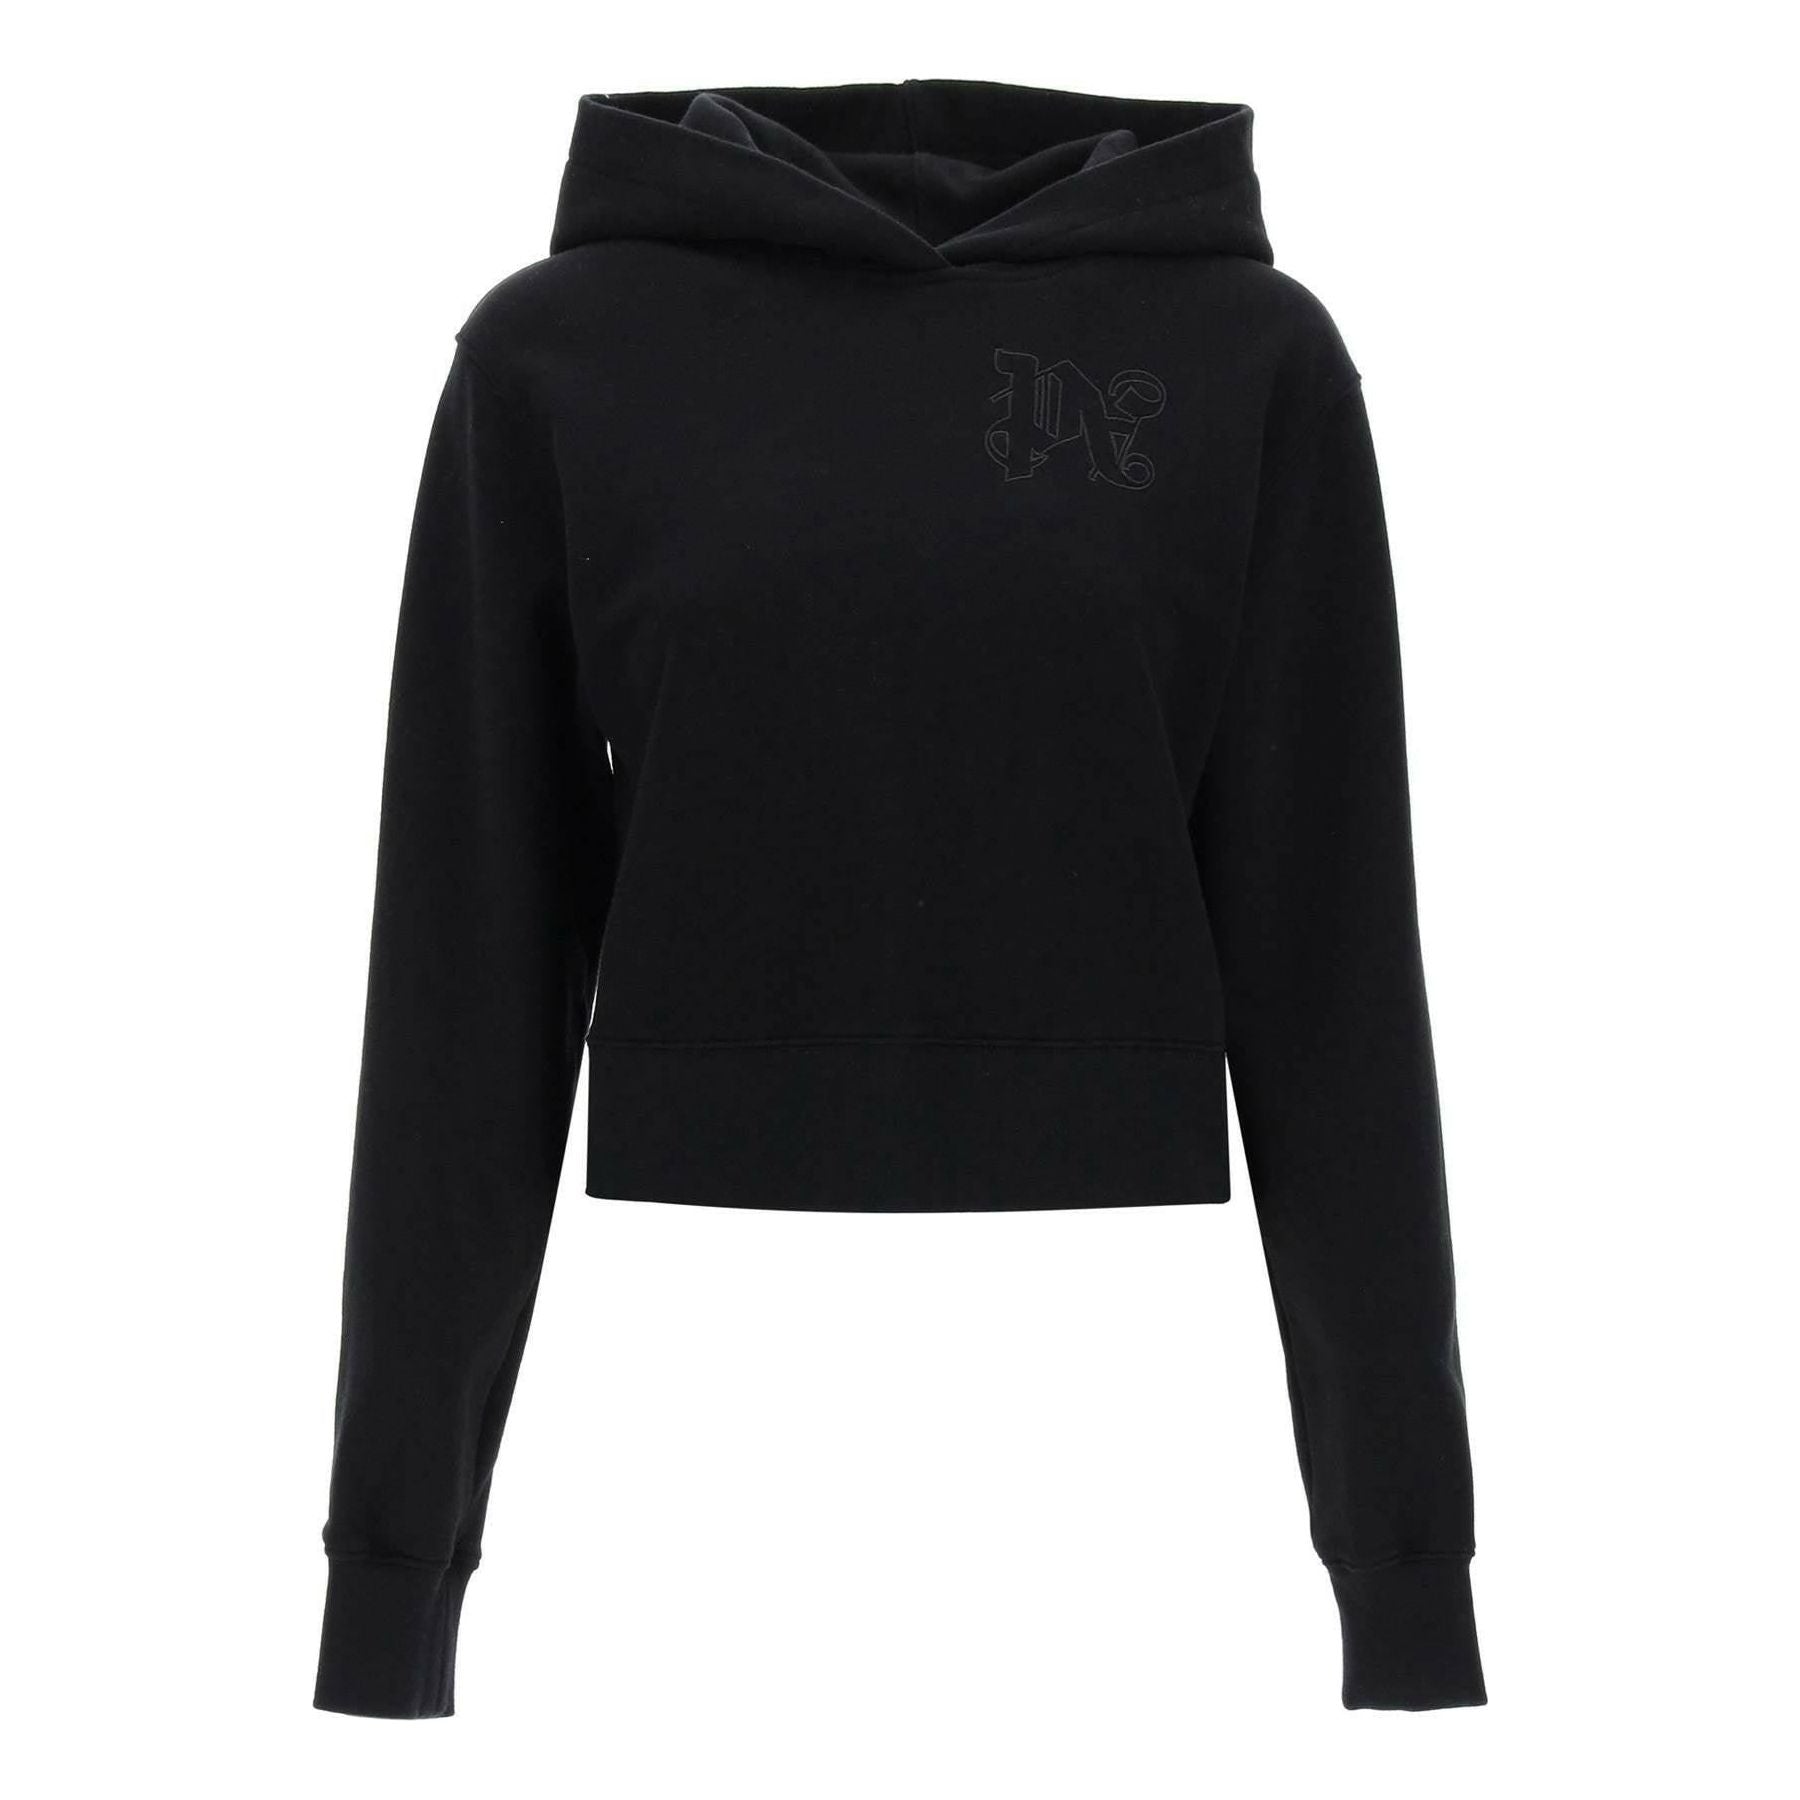 Cropped Hoodie With Monogram Embroidery PALM ANGELS JOHN JULIA.